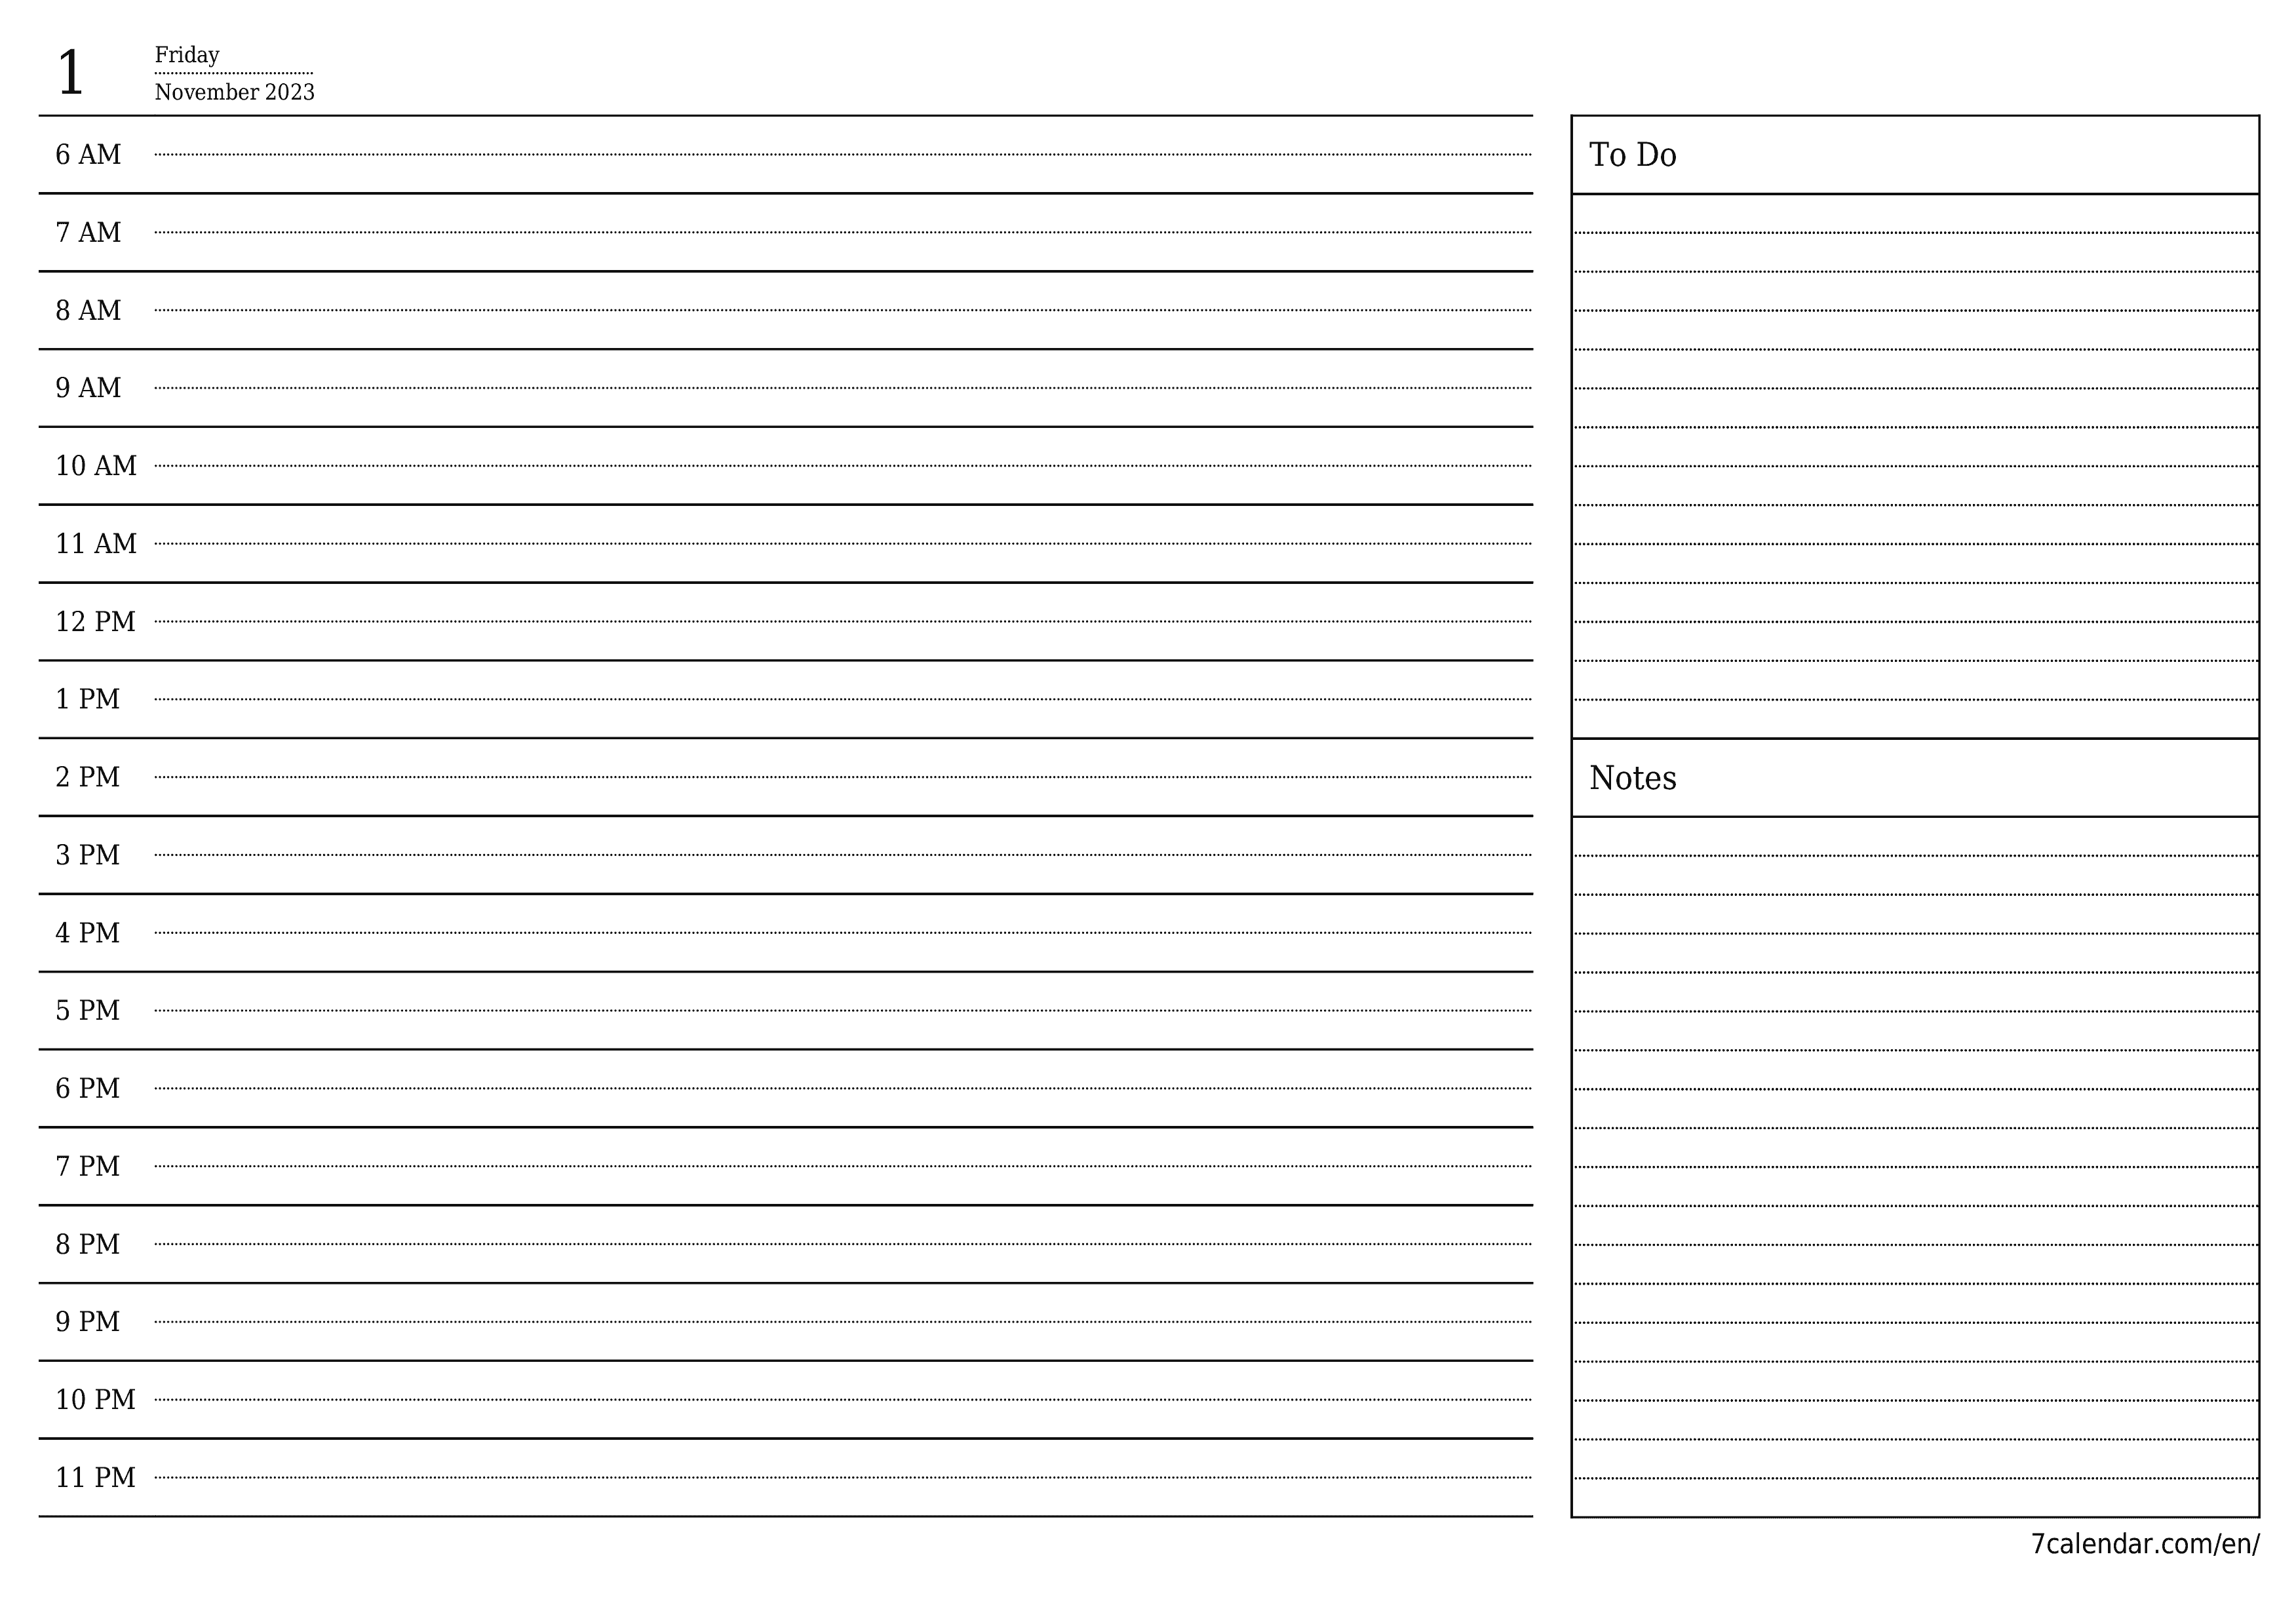 Blank daily printable calendar and planner for day November 2023 with notes, save and print to PDF PNG English - 7calendar.com